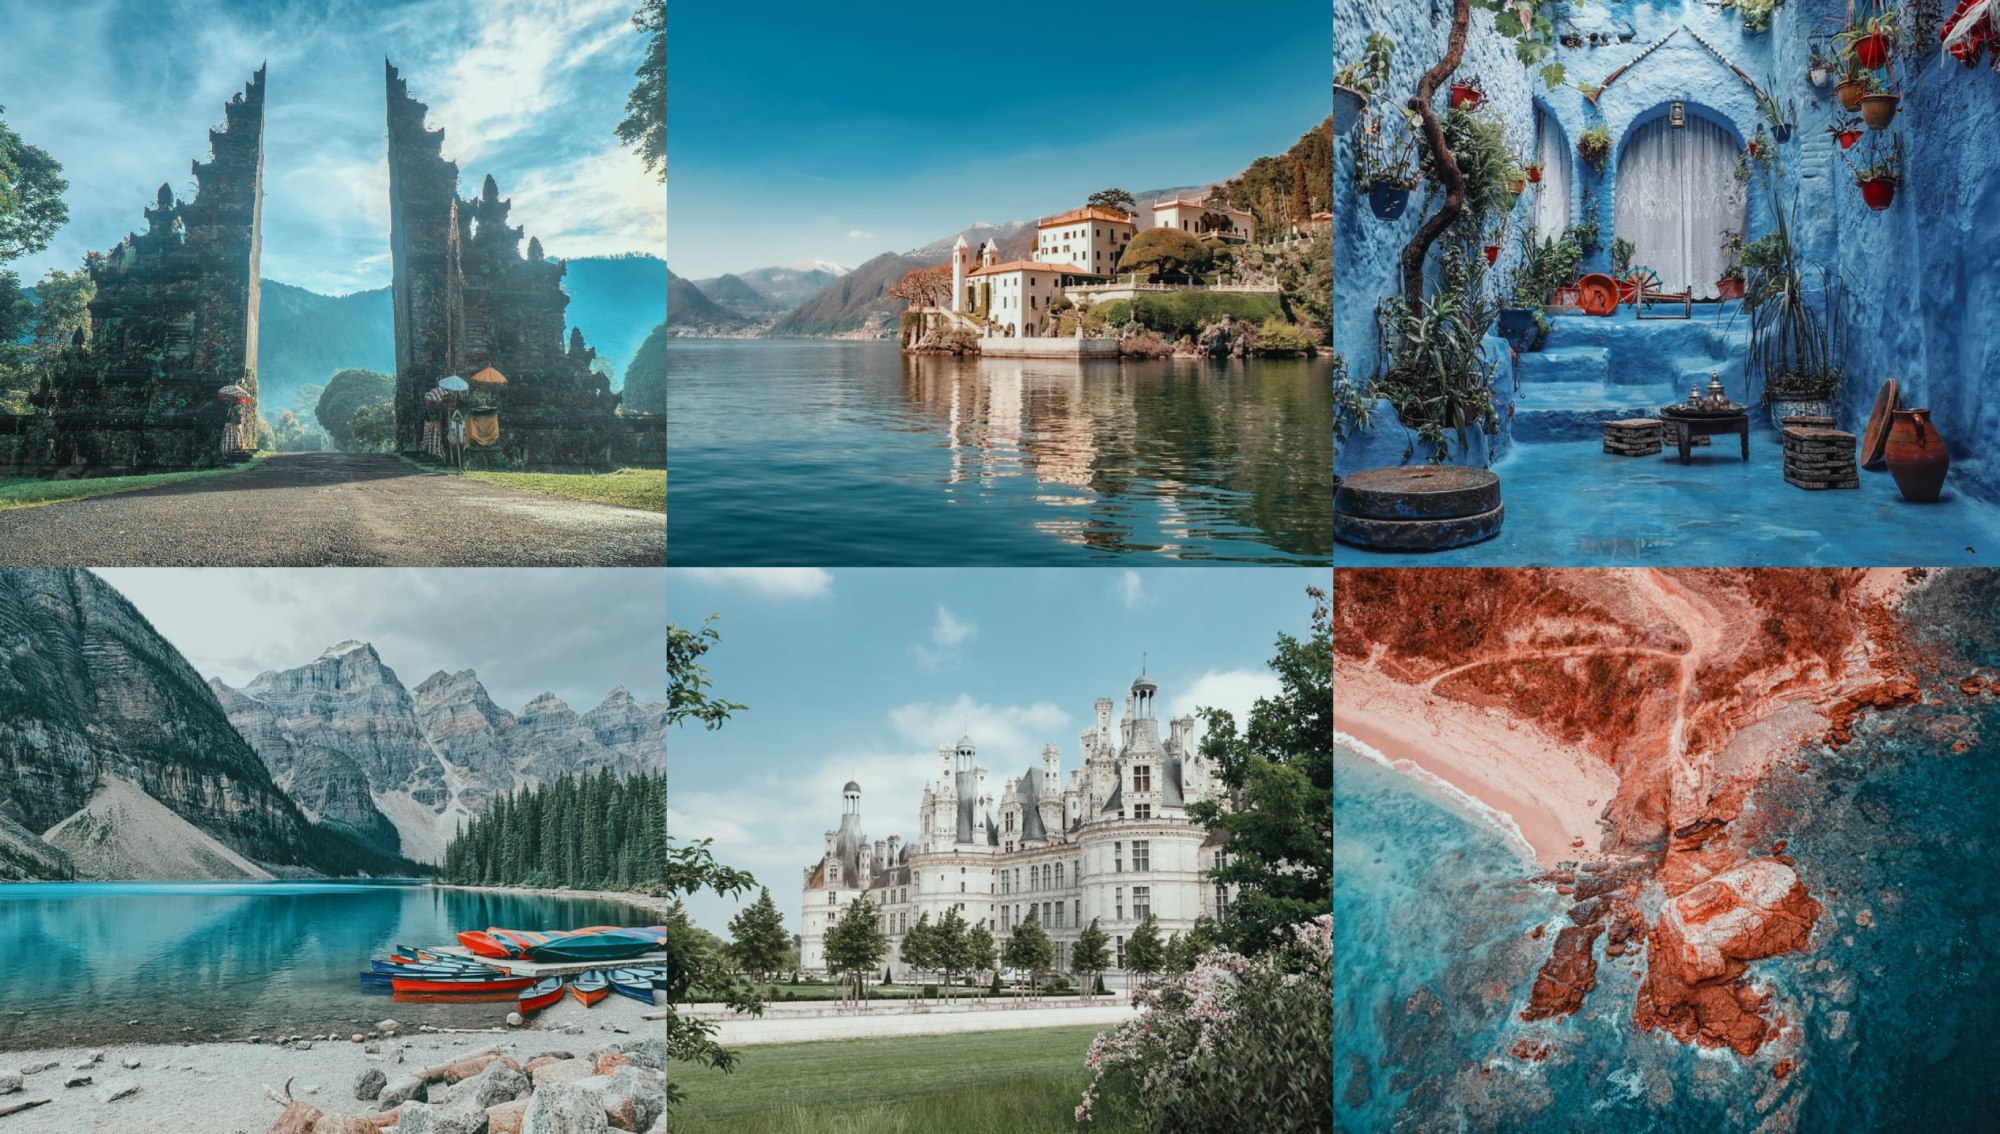 Most Instagrammable Destinations to Offer this 2022 – Make it Easy with a Travel CRM